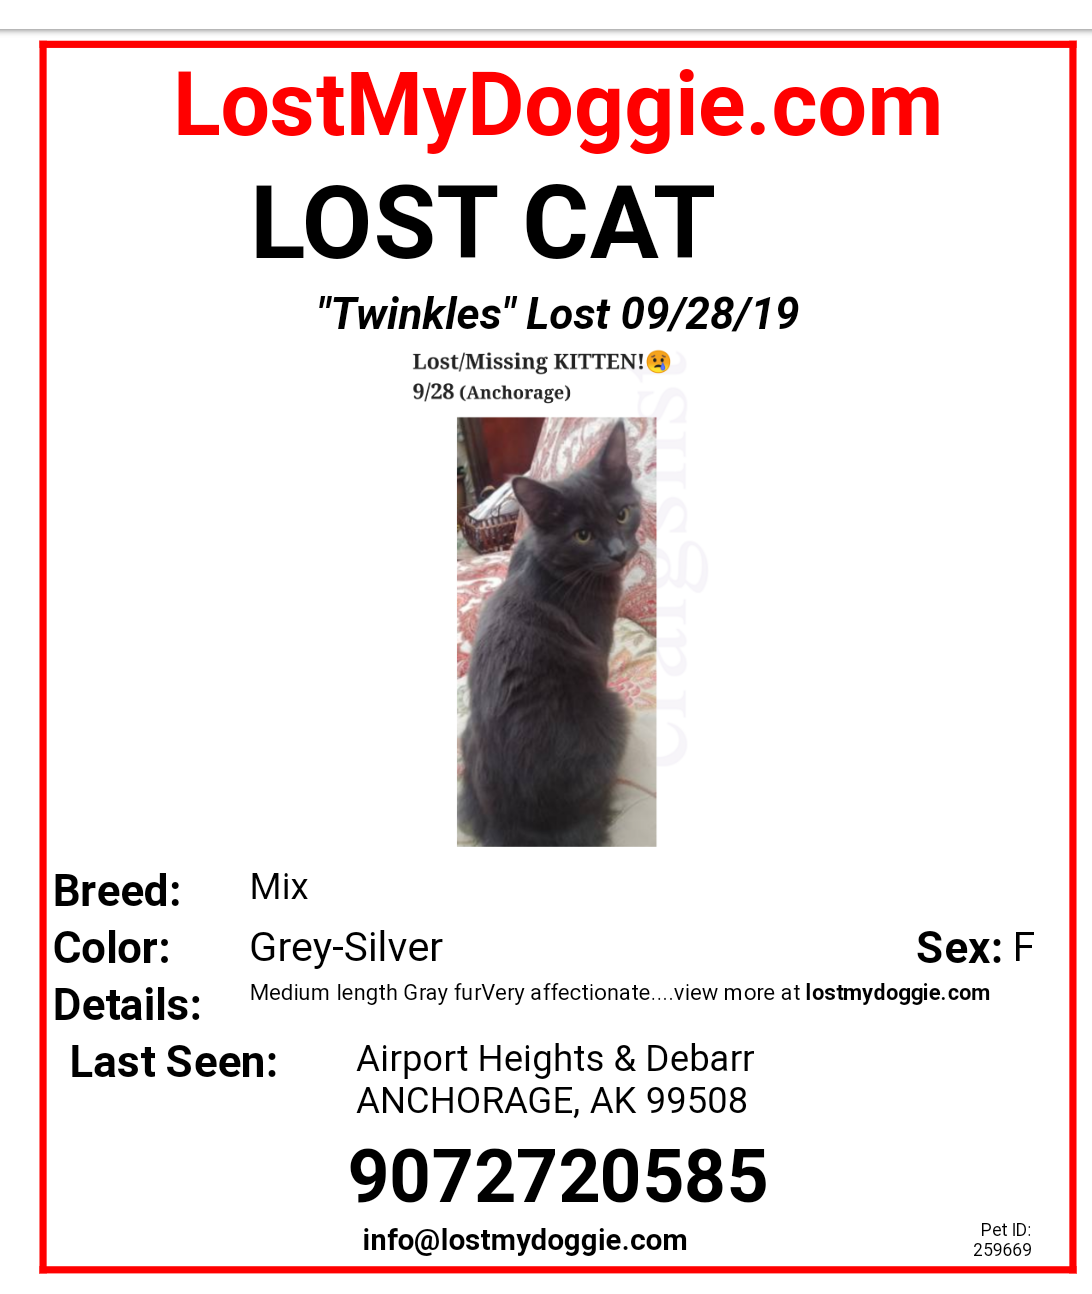 Image of Twinkles, Lost Cat